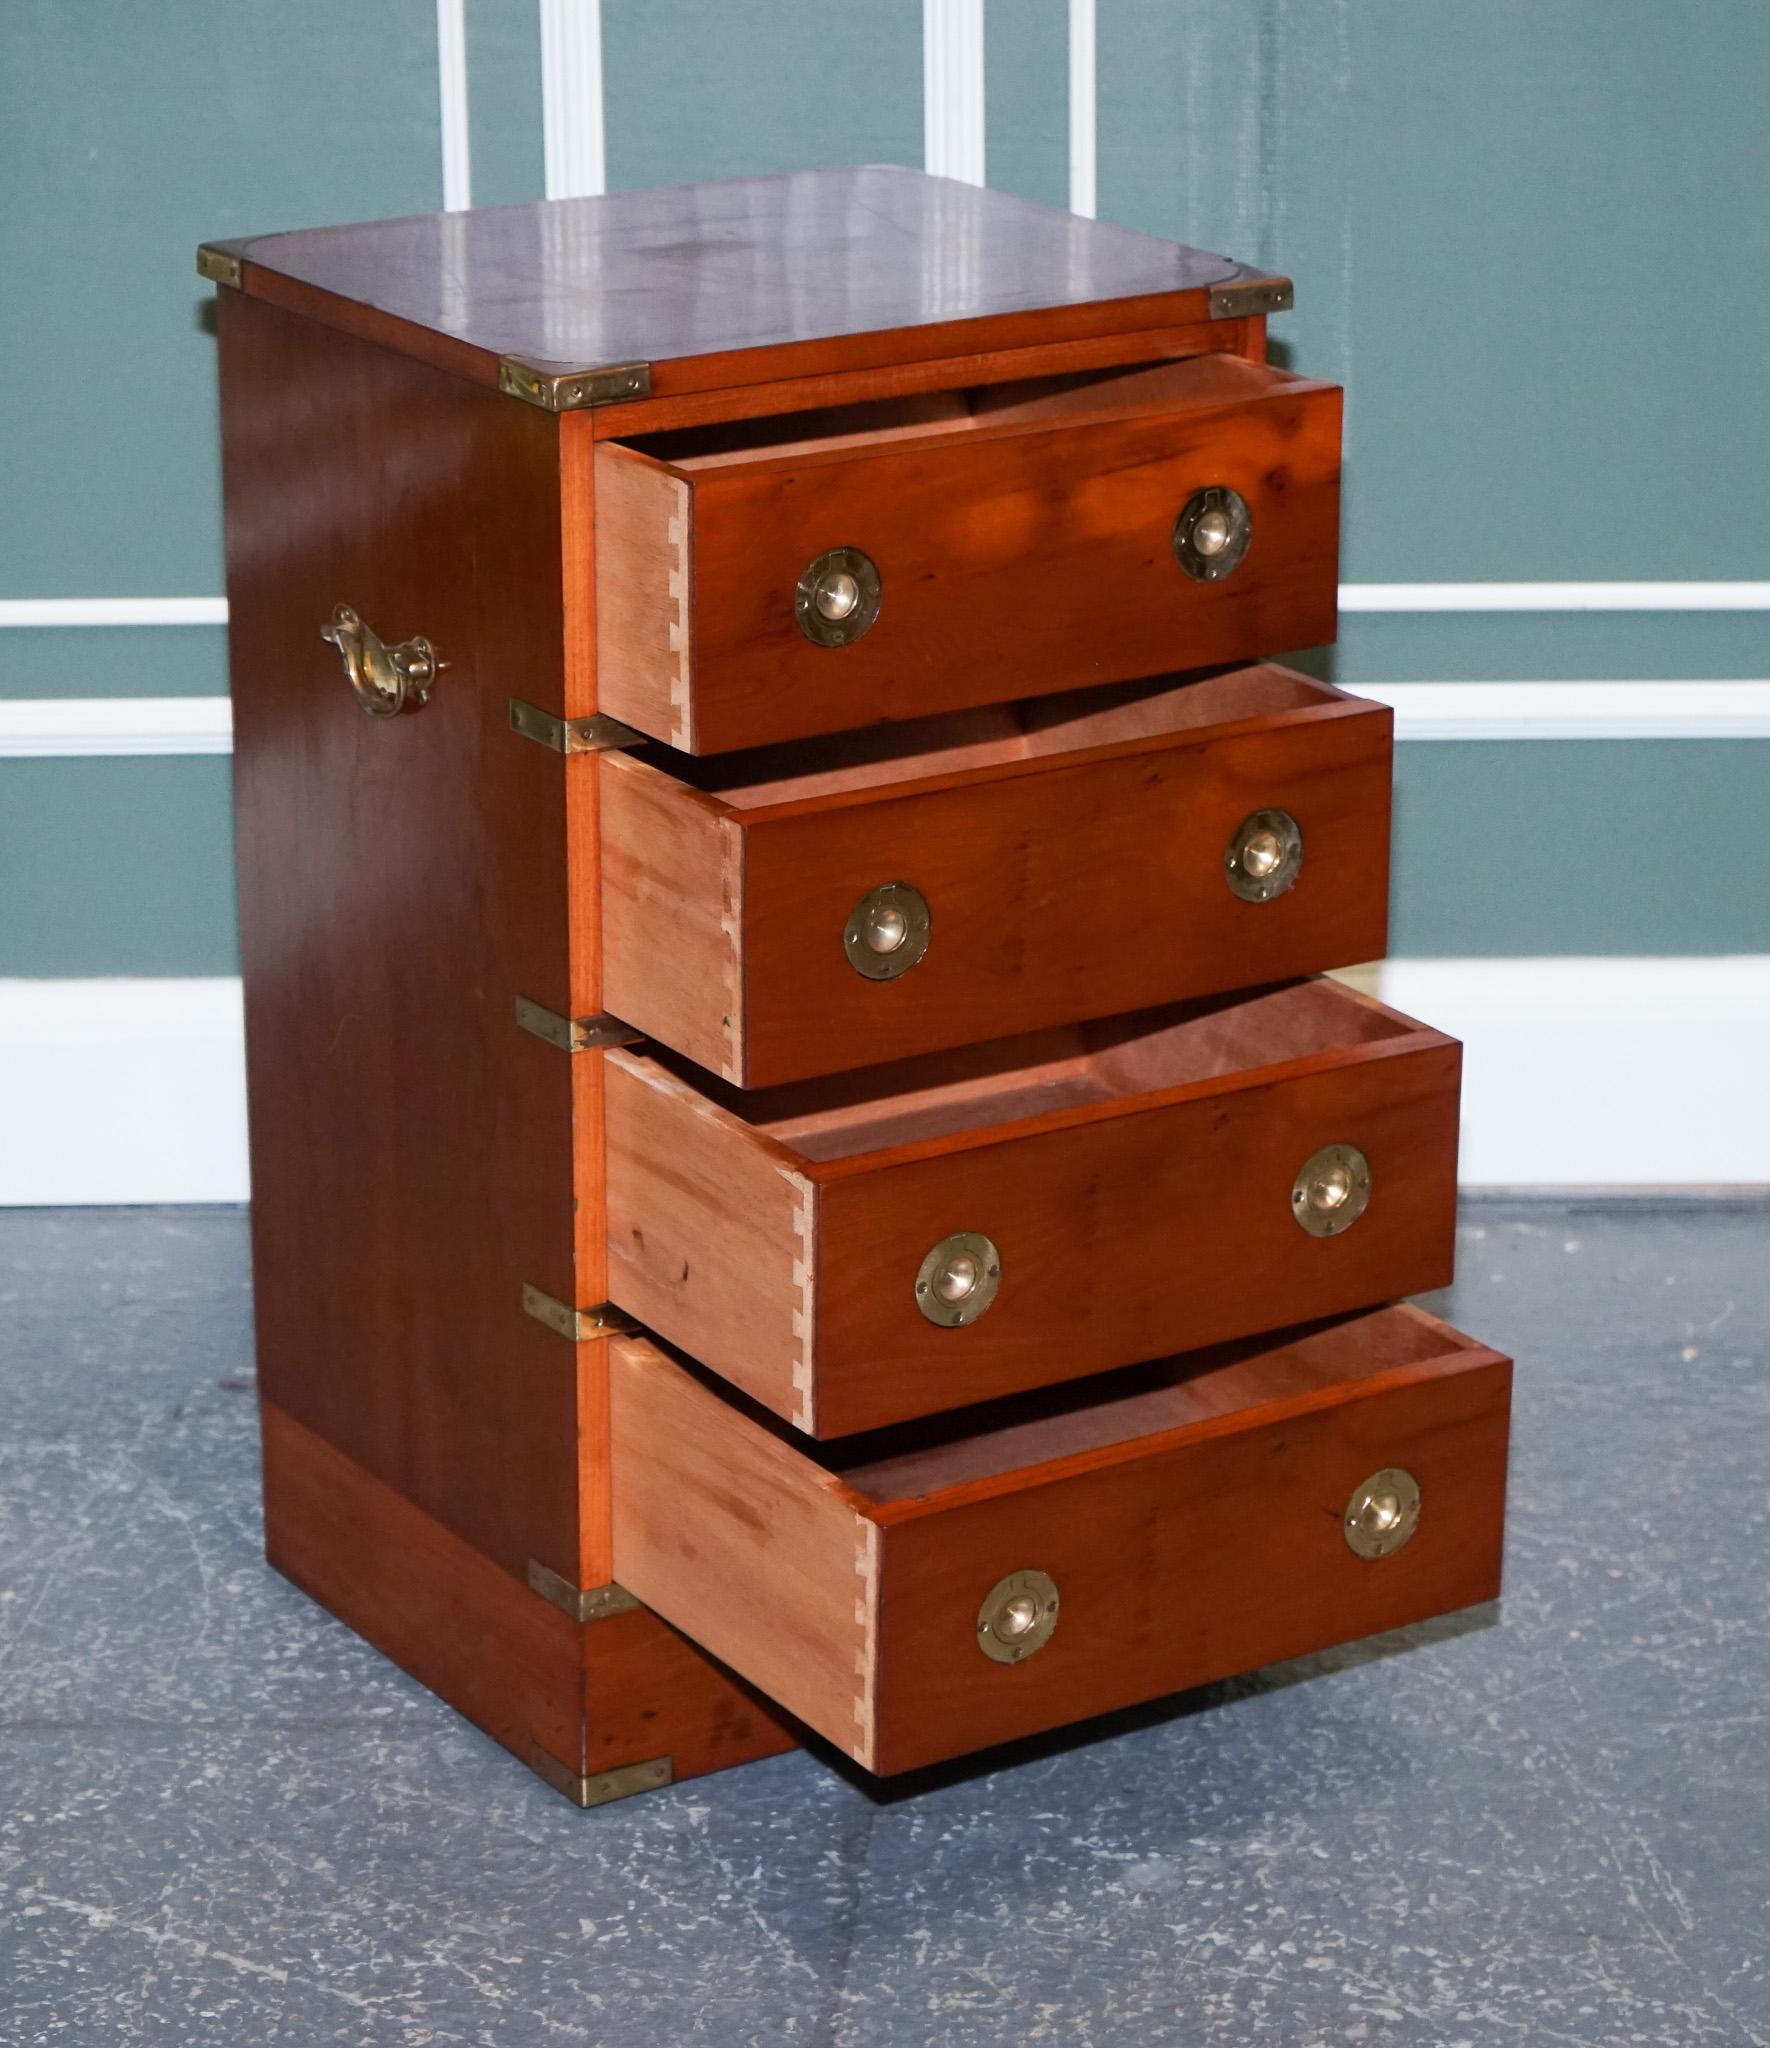 British Vintage Yew Wood Military Campaign Chest of Drawers with 4 Drawers Brass Fitting